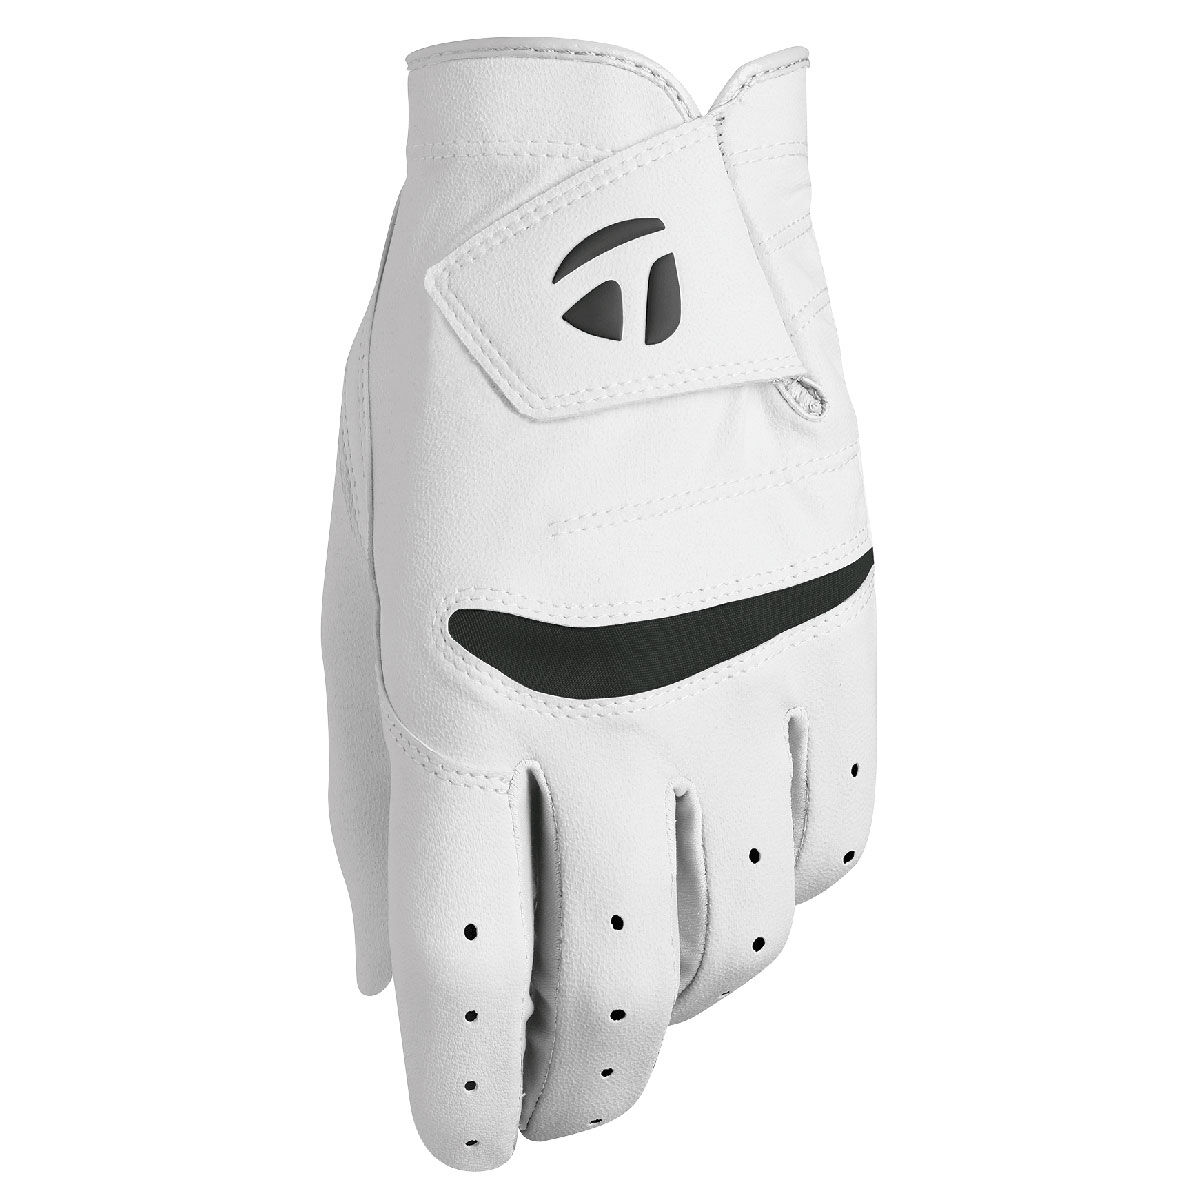 TaylorMade Stratus Soft Golf Glove, Mens, Left hand, Large, White | American Golf - Father's Day Gift von TaylorMade